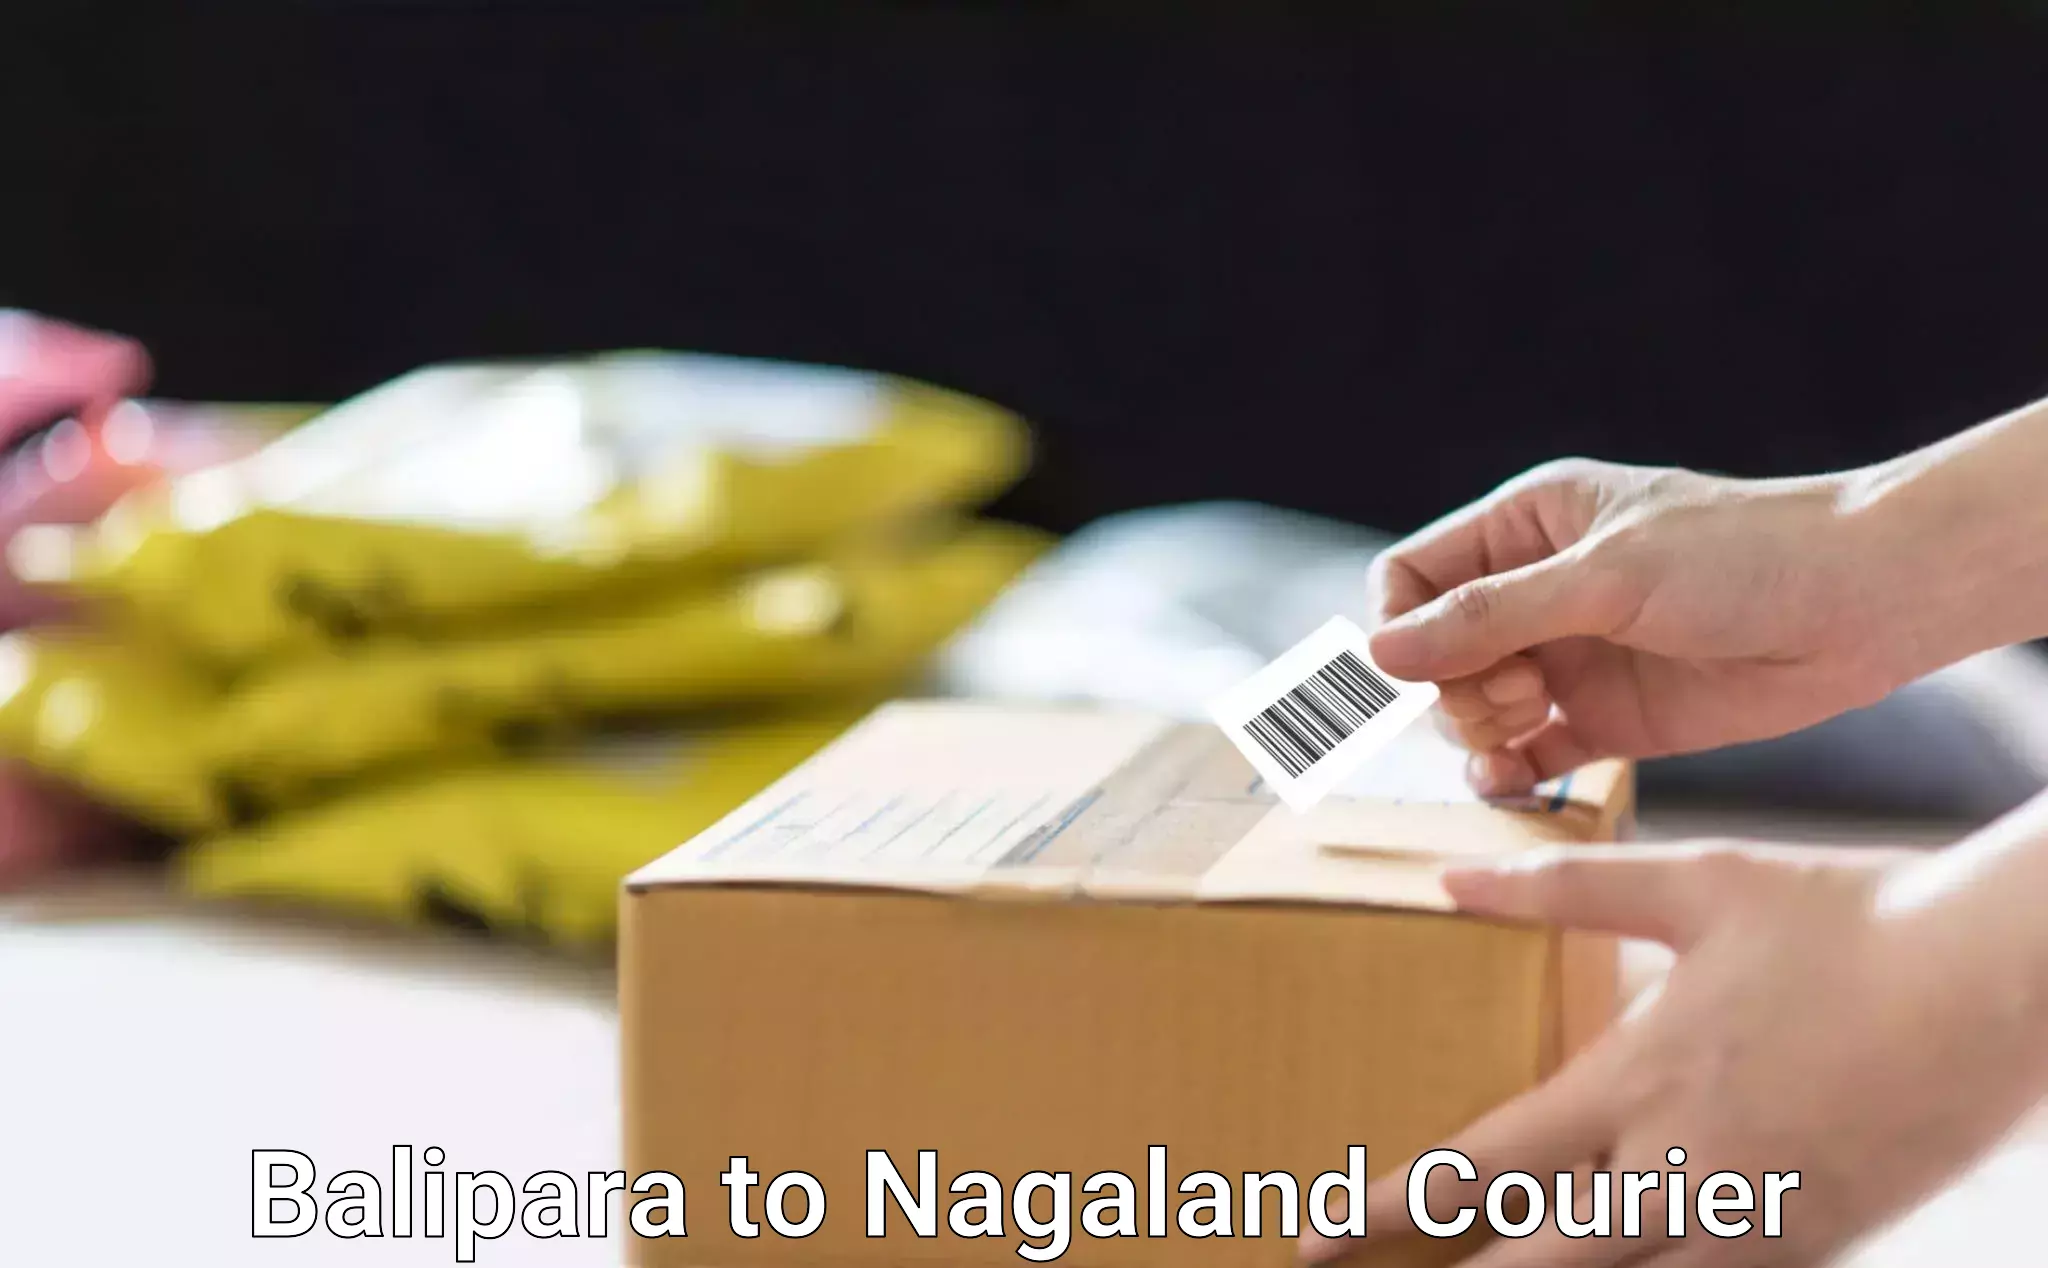 Automated parcel services Balipara to Dimapur